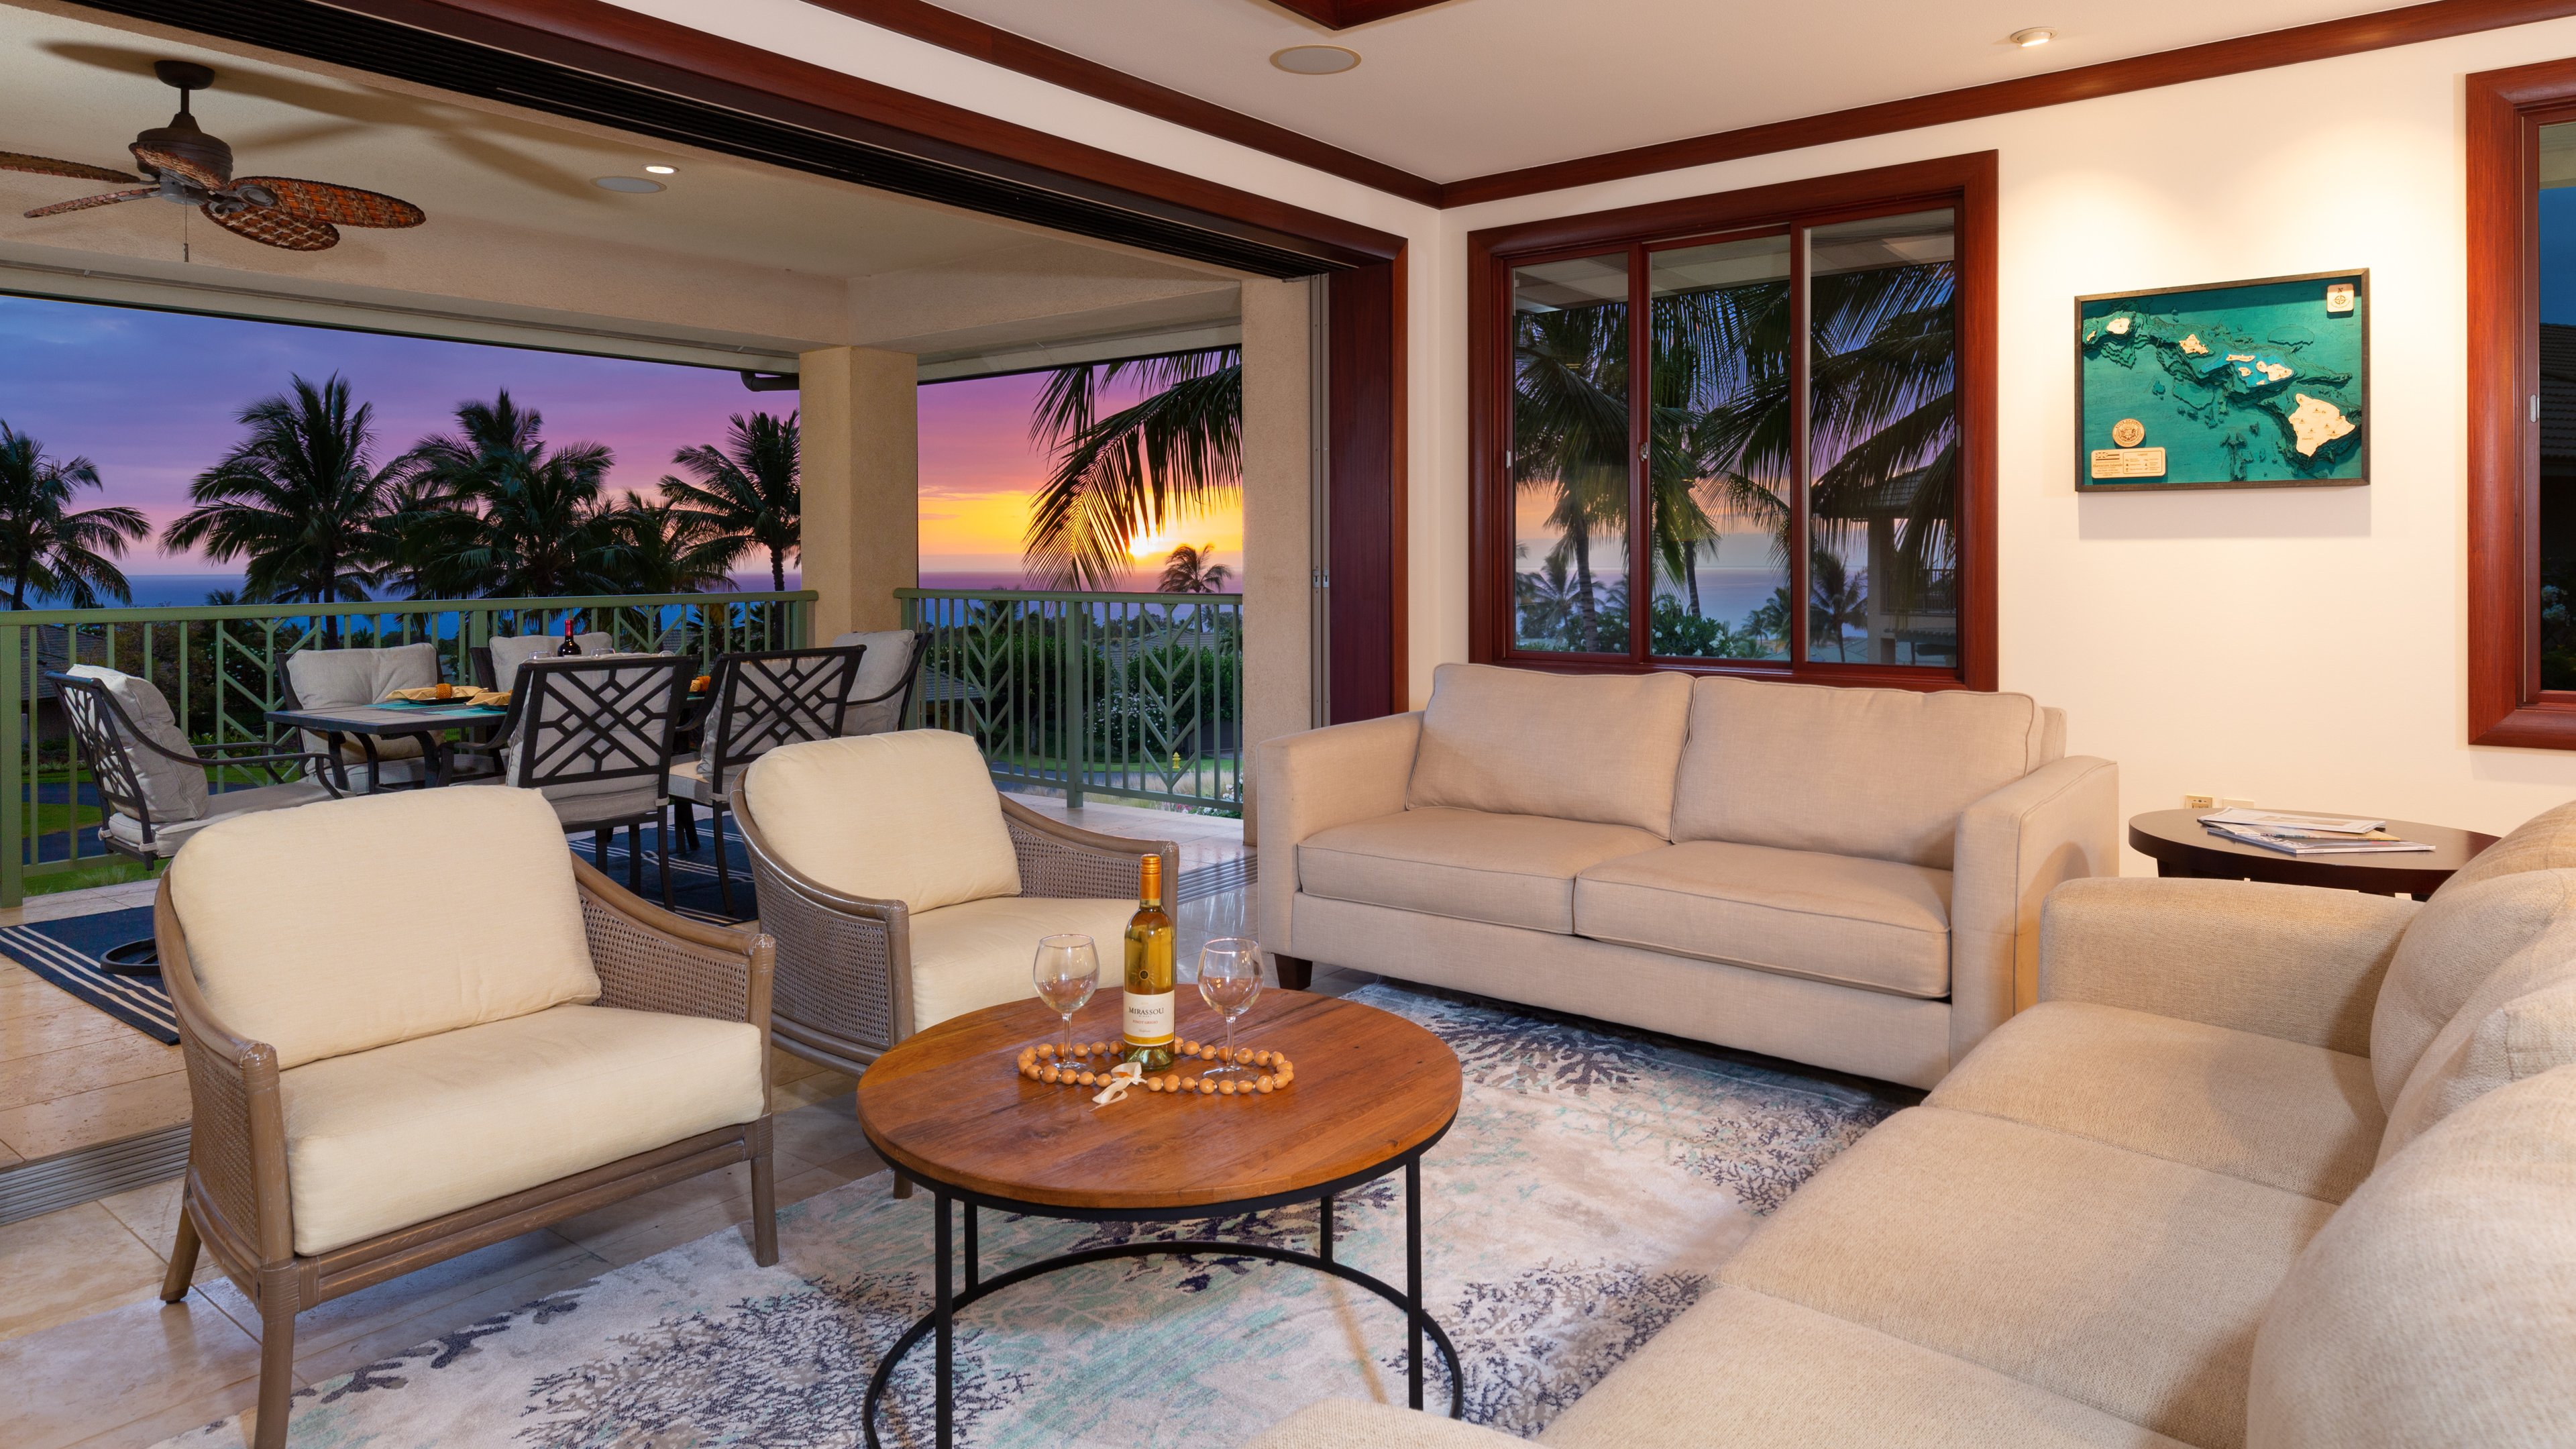 Enjoy combined indoor outdoor living with large pocket doors to the lanai.